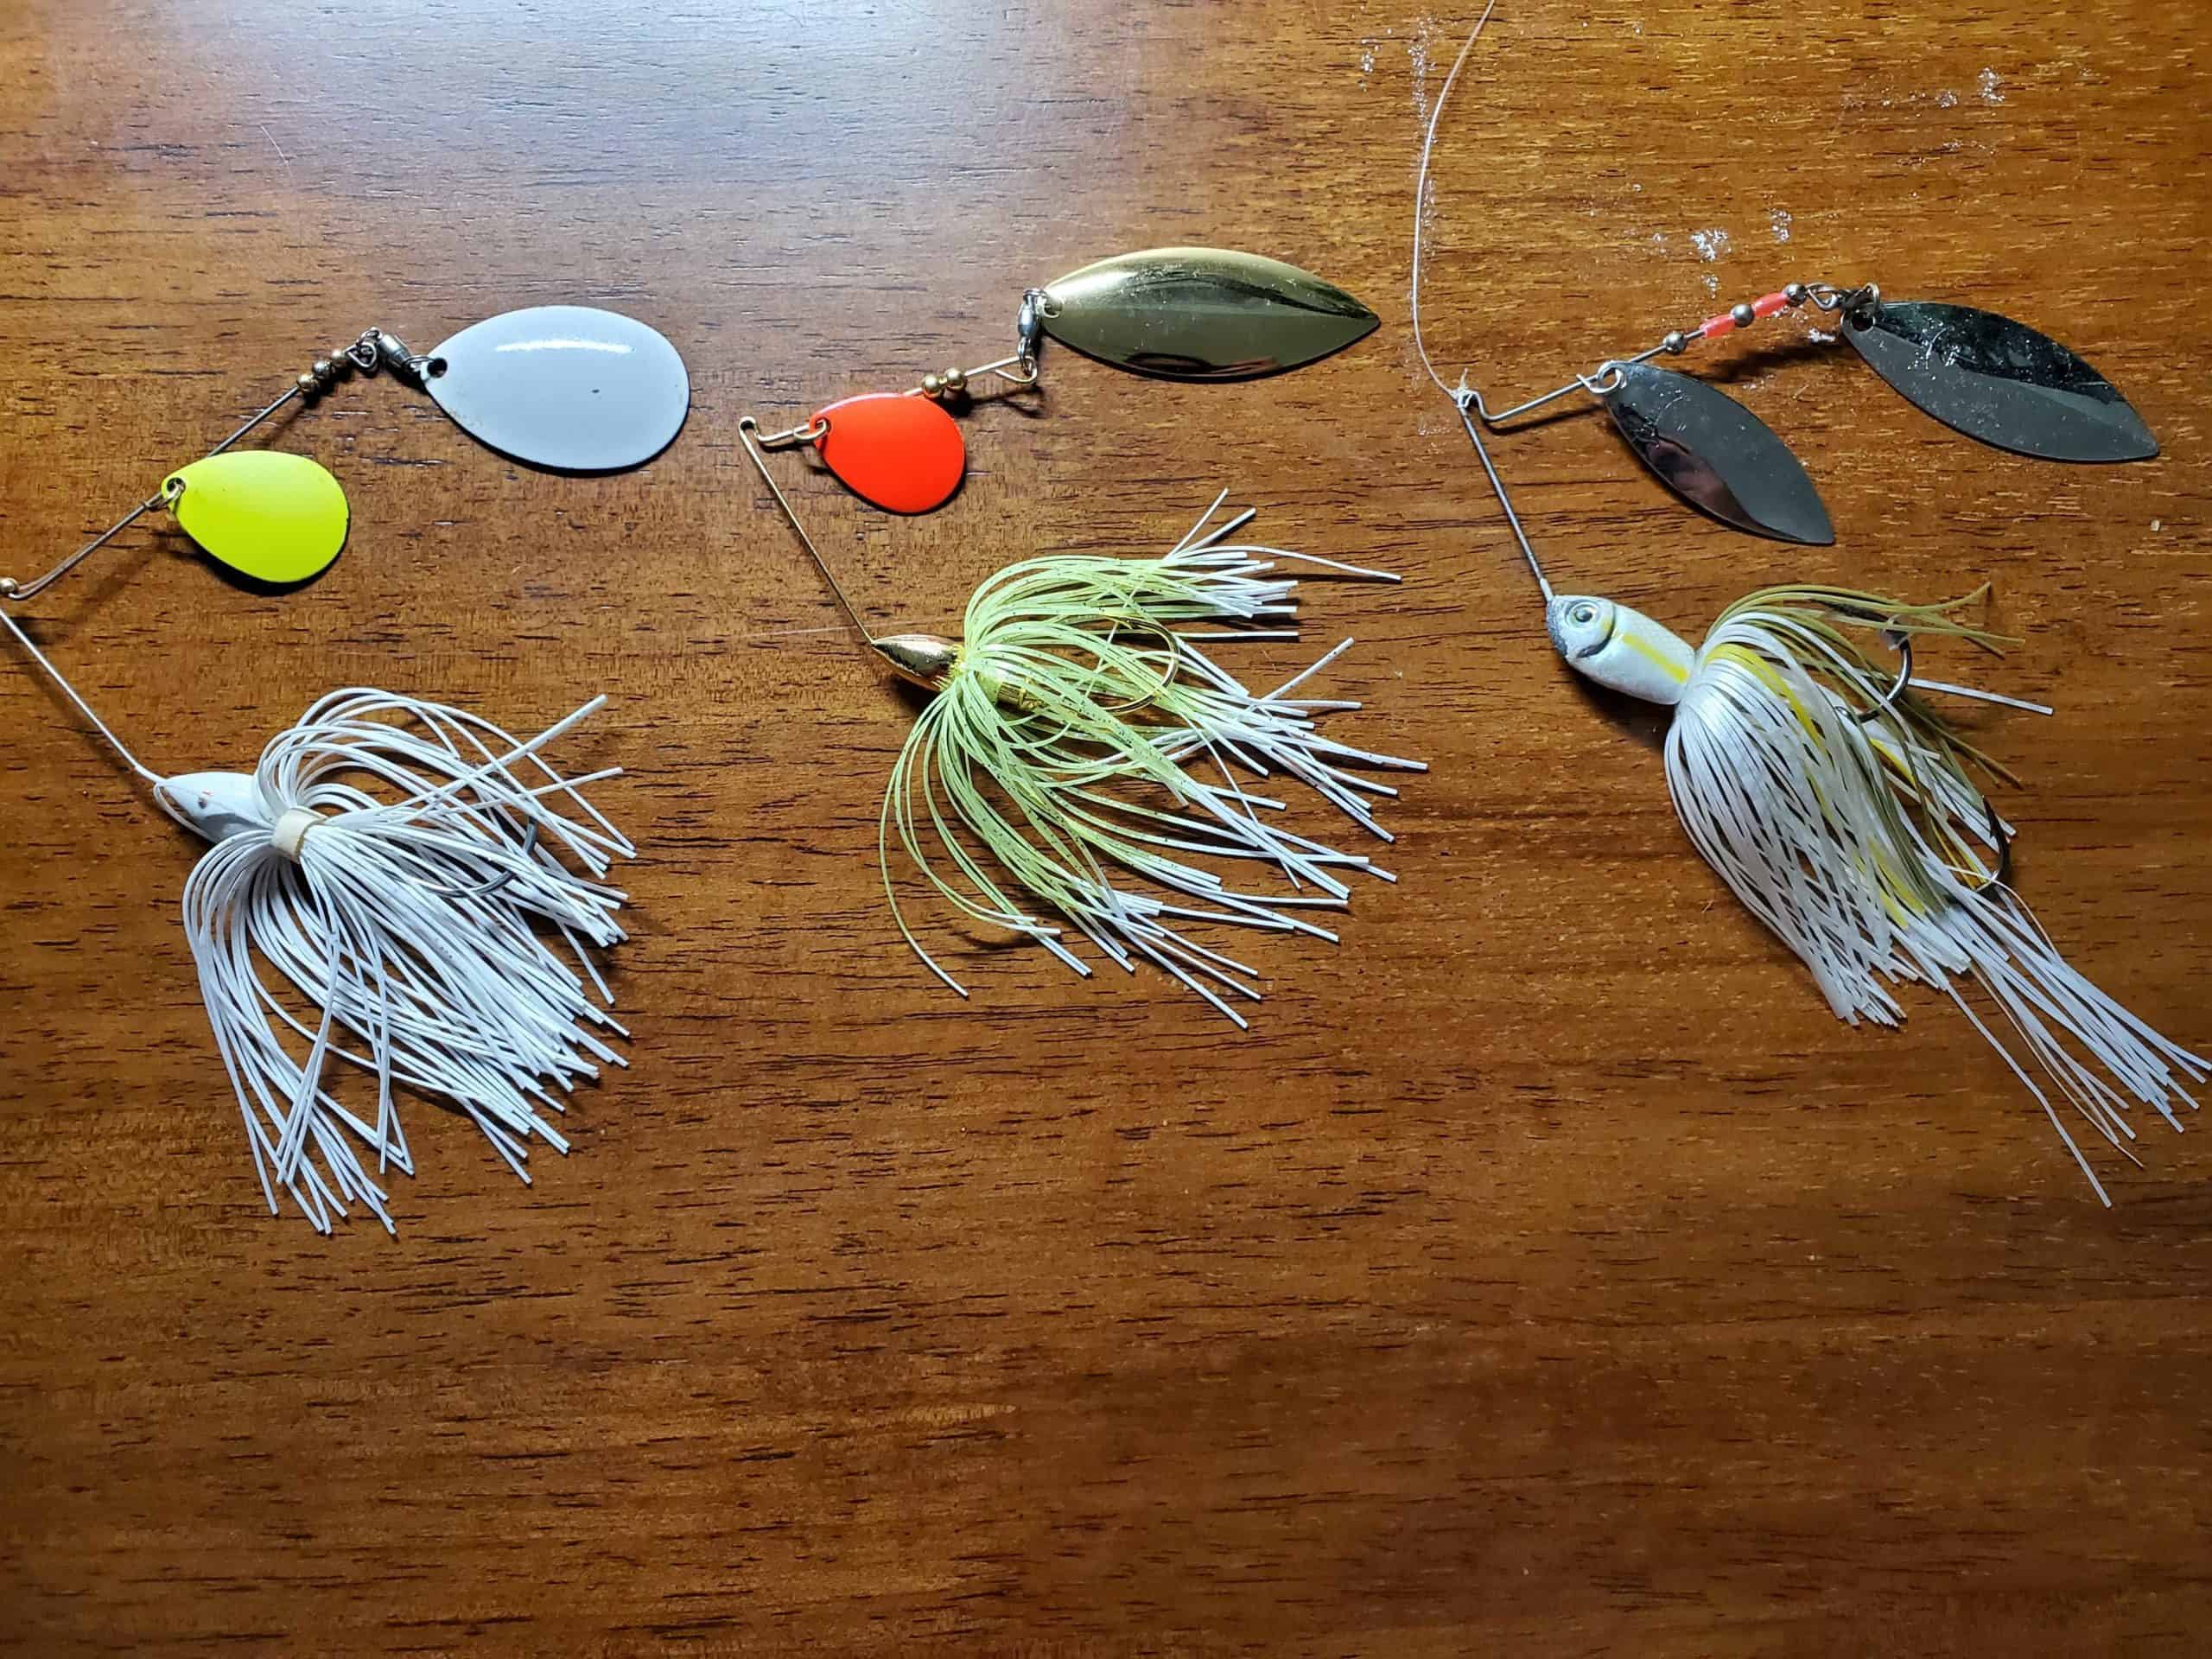 These Spinnerbaits Need To Be In Everyone's Tackle Box! They are that good!  